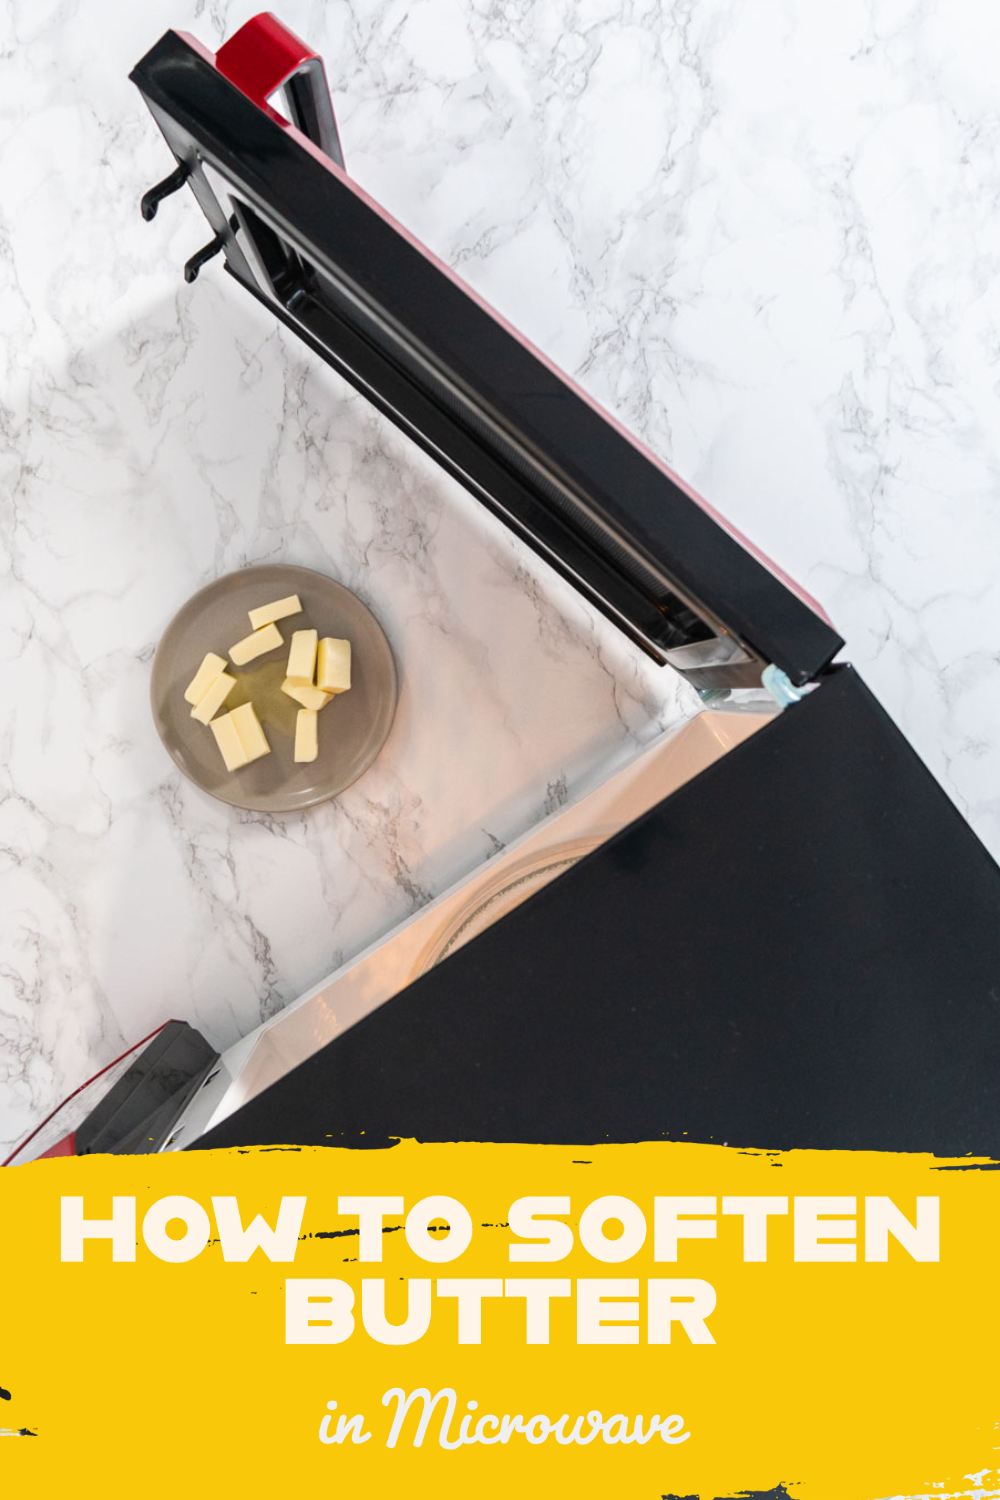 How to Soften Butter in Microwave